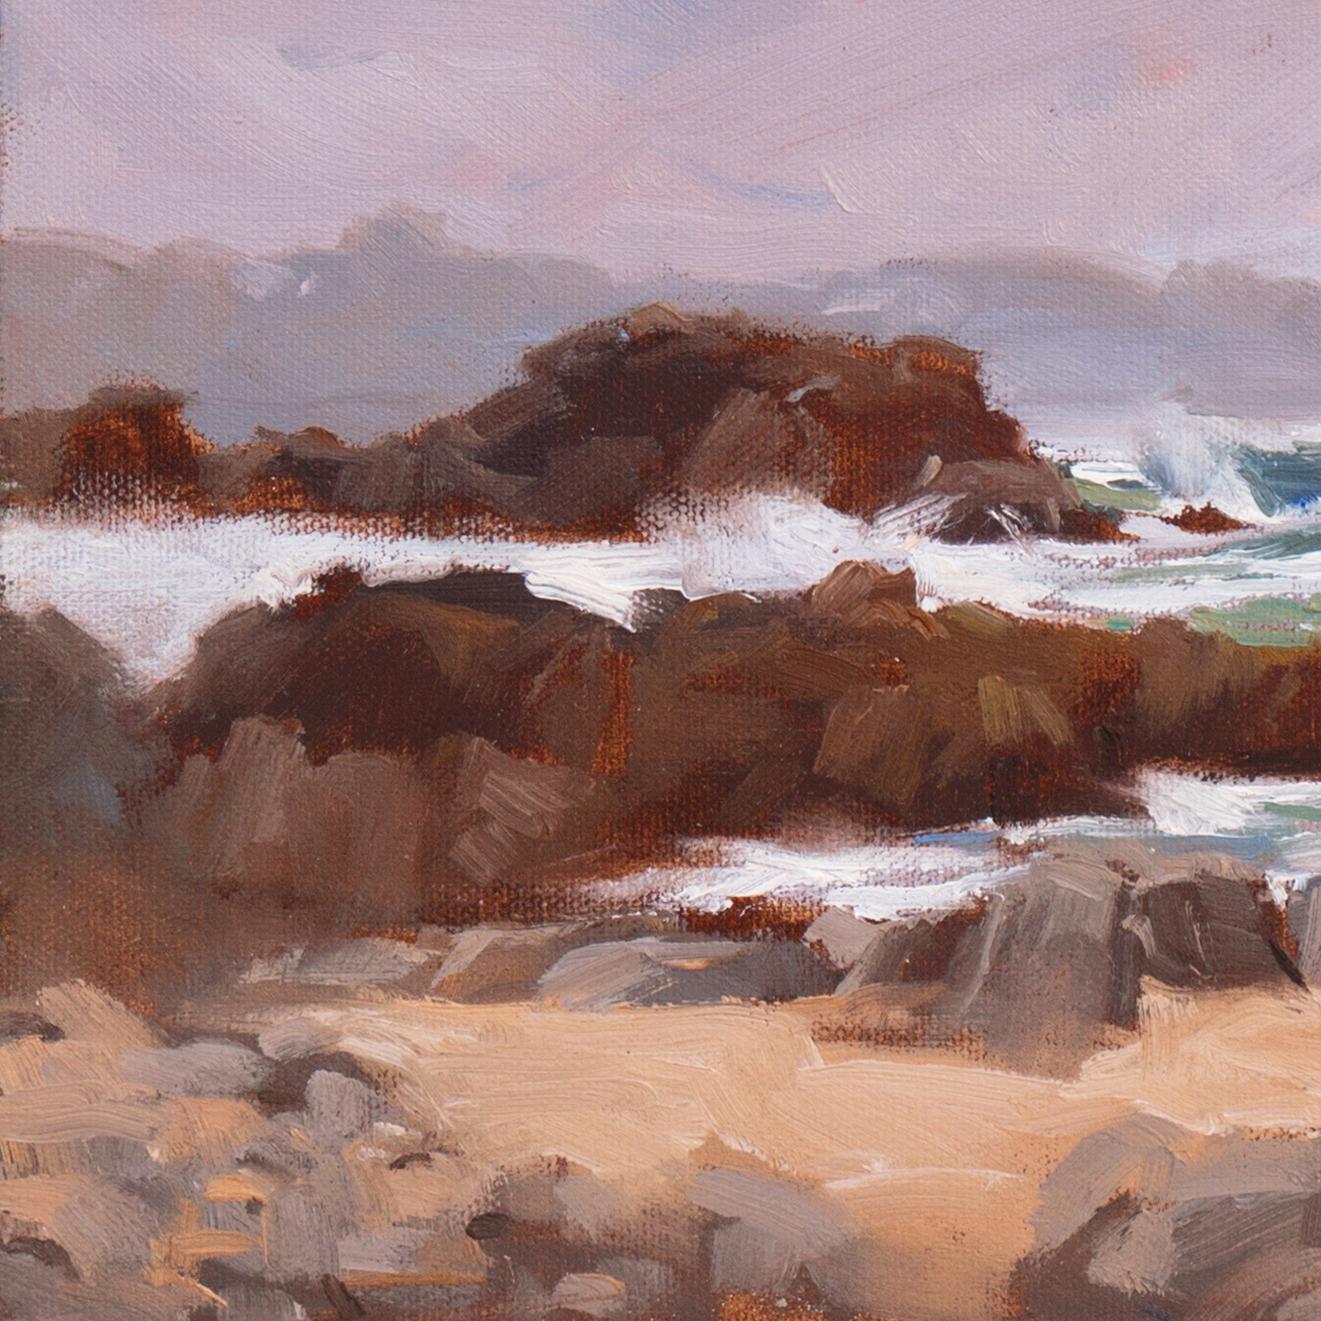 Signed lower right, 'B. L. Kersey' for Laurie Kersey (American, born 1961), additionally signed, verso, titled, 'Stormy Beach, Pacific Grove Coast, Near Asilomar' and dated 2002.

Laurie Kersey’s was raised in an artistic household and grew up